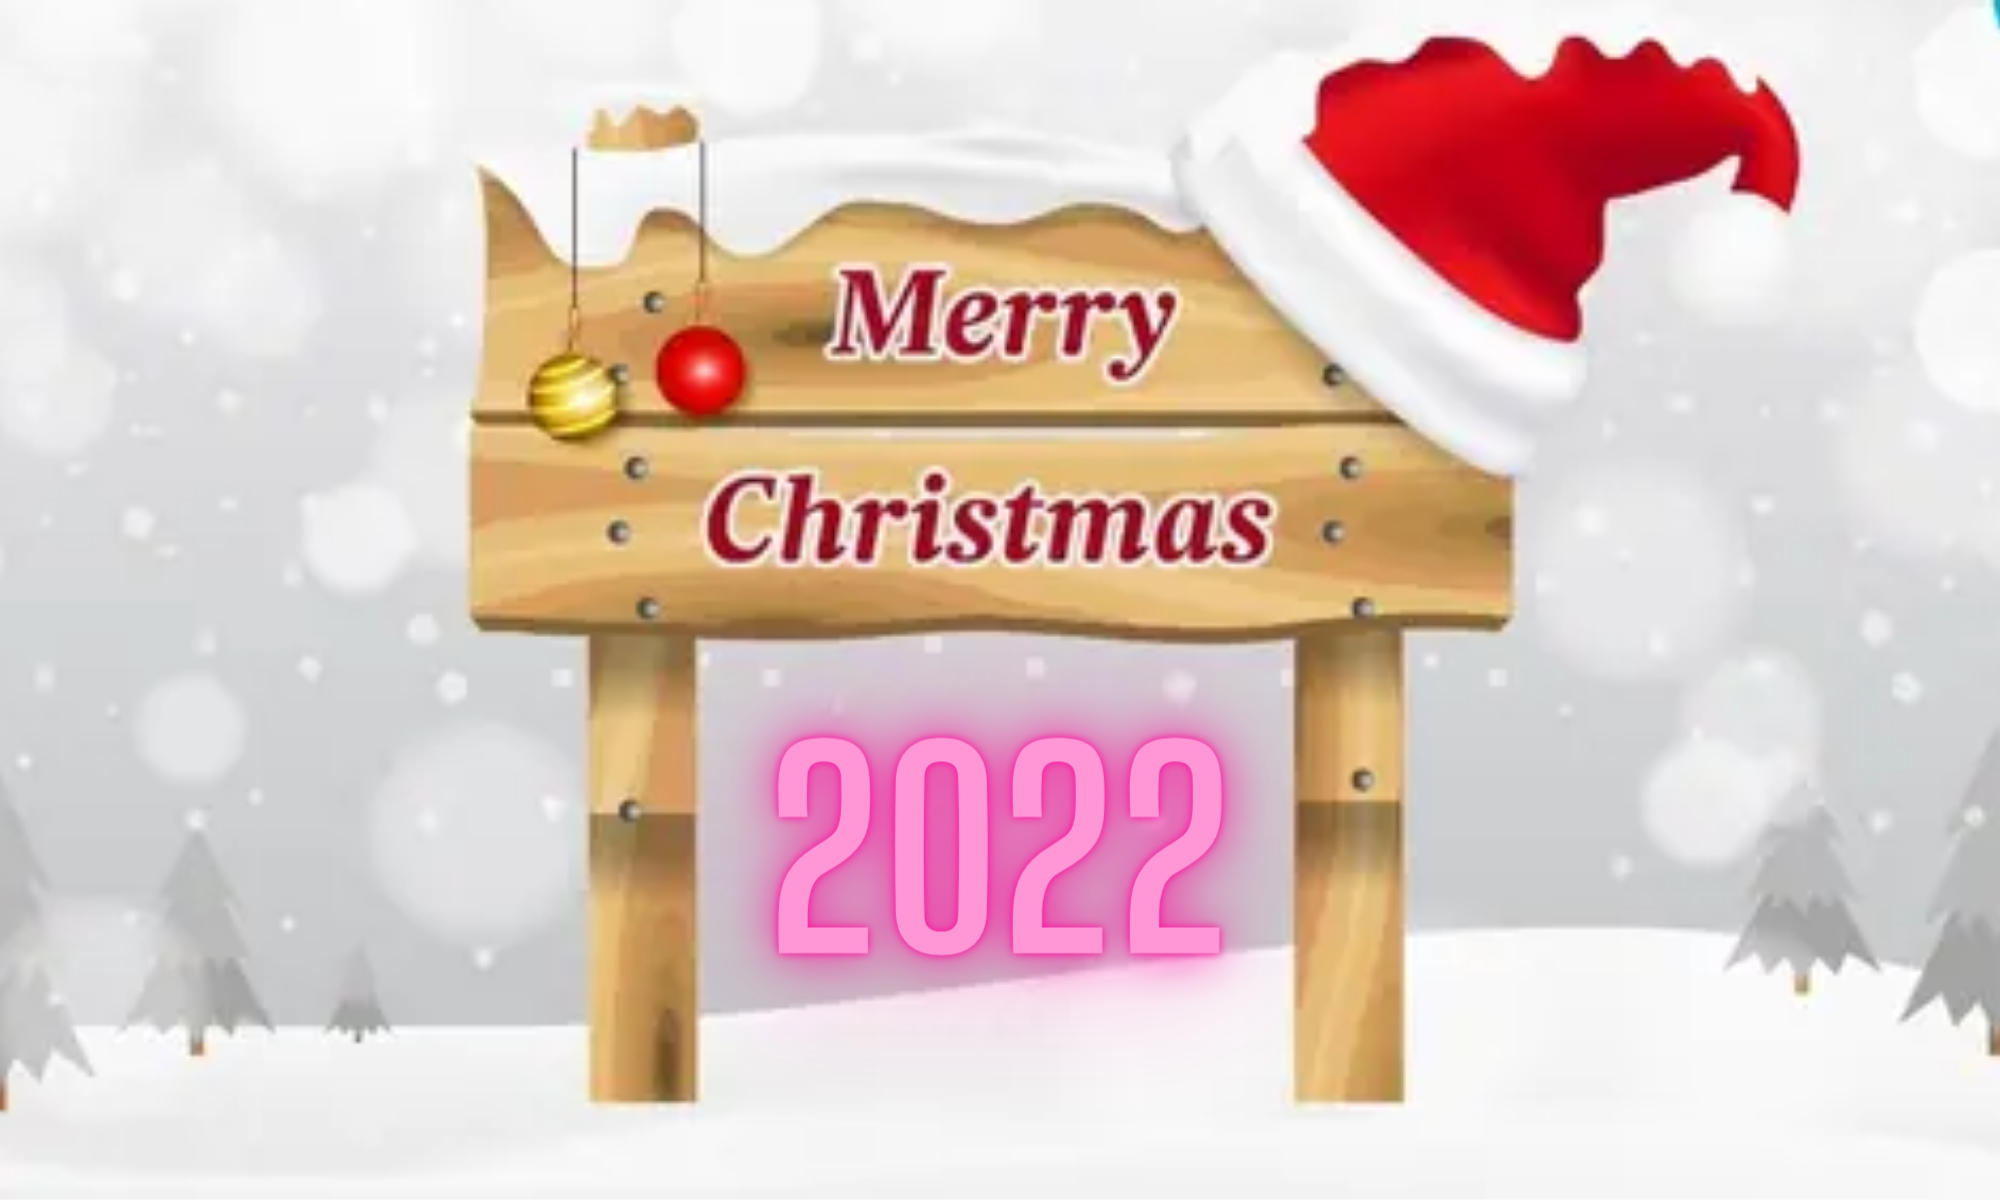 Merry Christmas 2022 Wishes, Origin, Difference in Happy and Merry Christmas_40.1